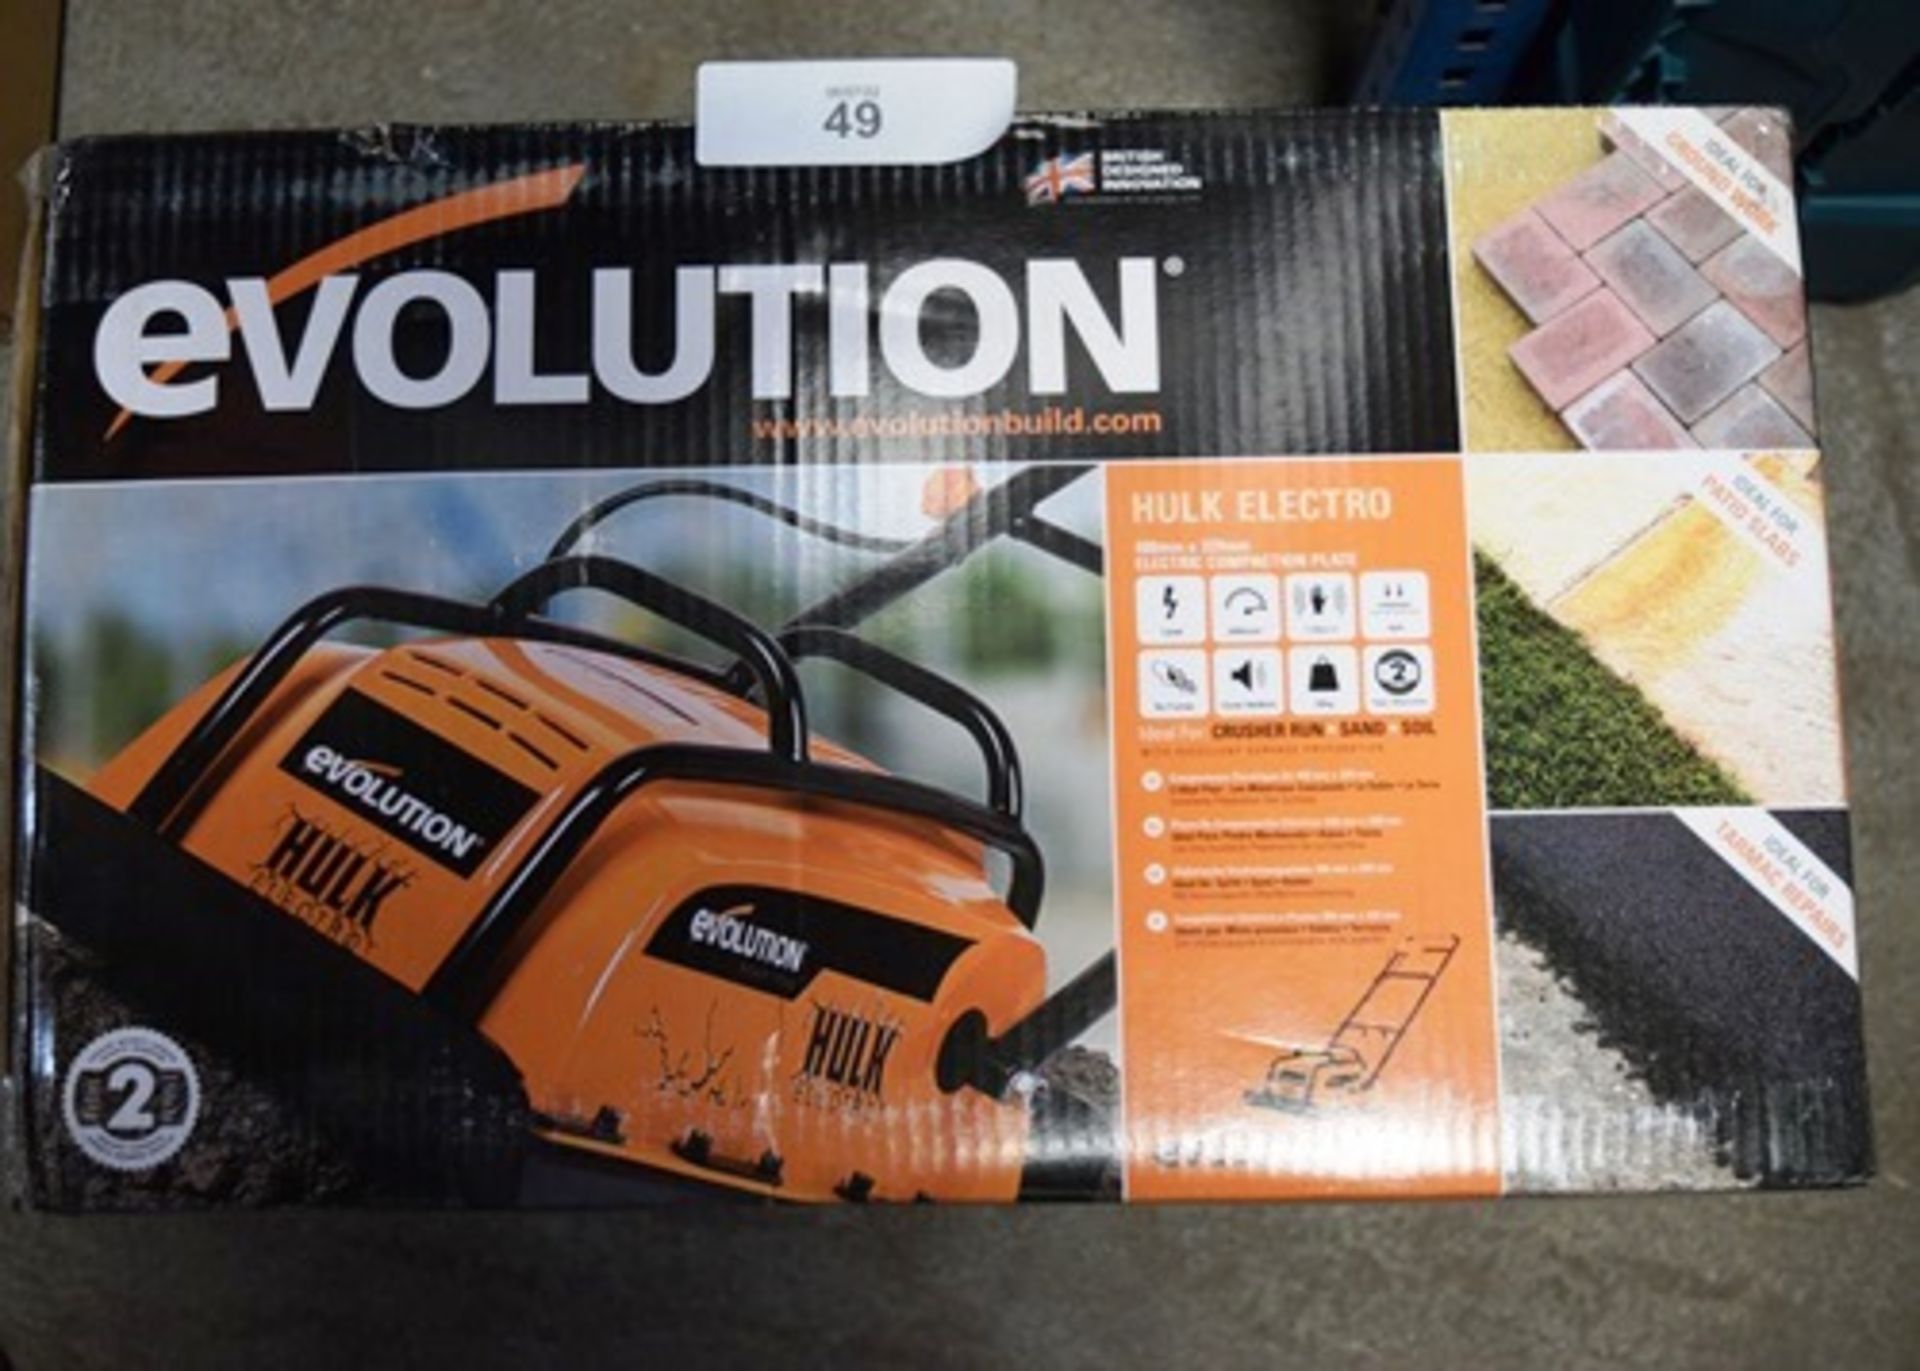 1 x Evolution Hulk electric compaction plate, plate size 400mm x 320mm, 230V - New in box (BRSW)